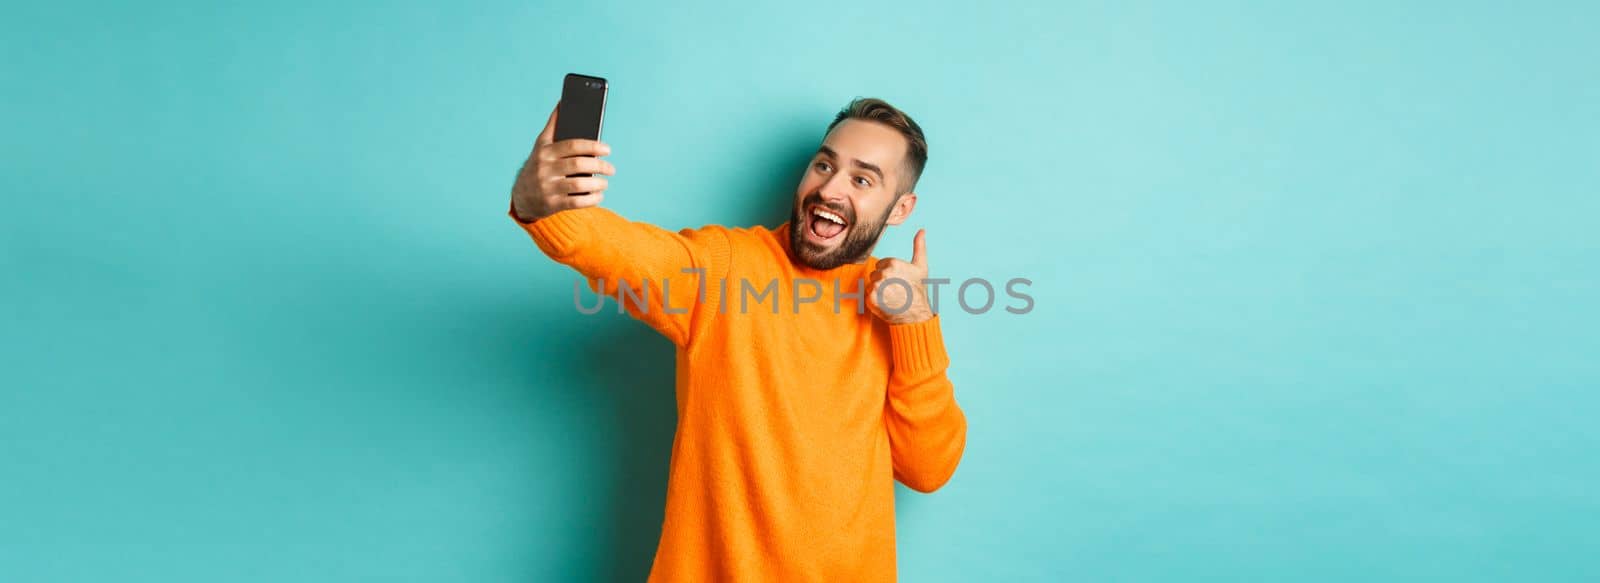 Handsome young man taking selfie on mobile phone, showing thumbs up at smartphone camera, recording vlogg, standing over light blue background.